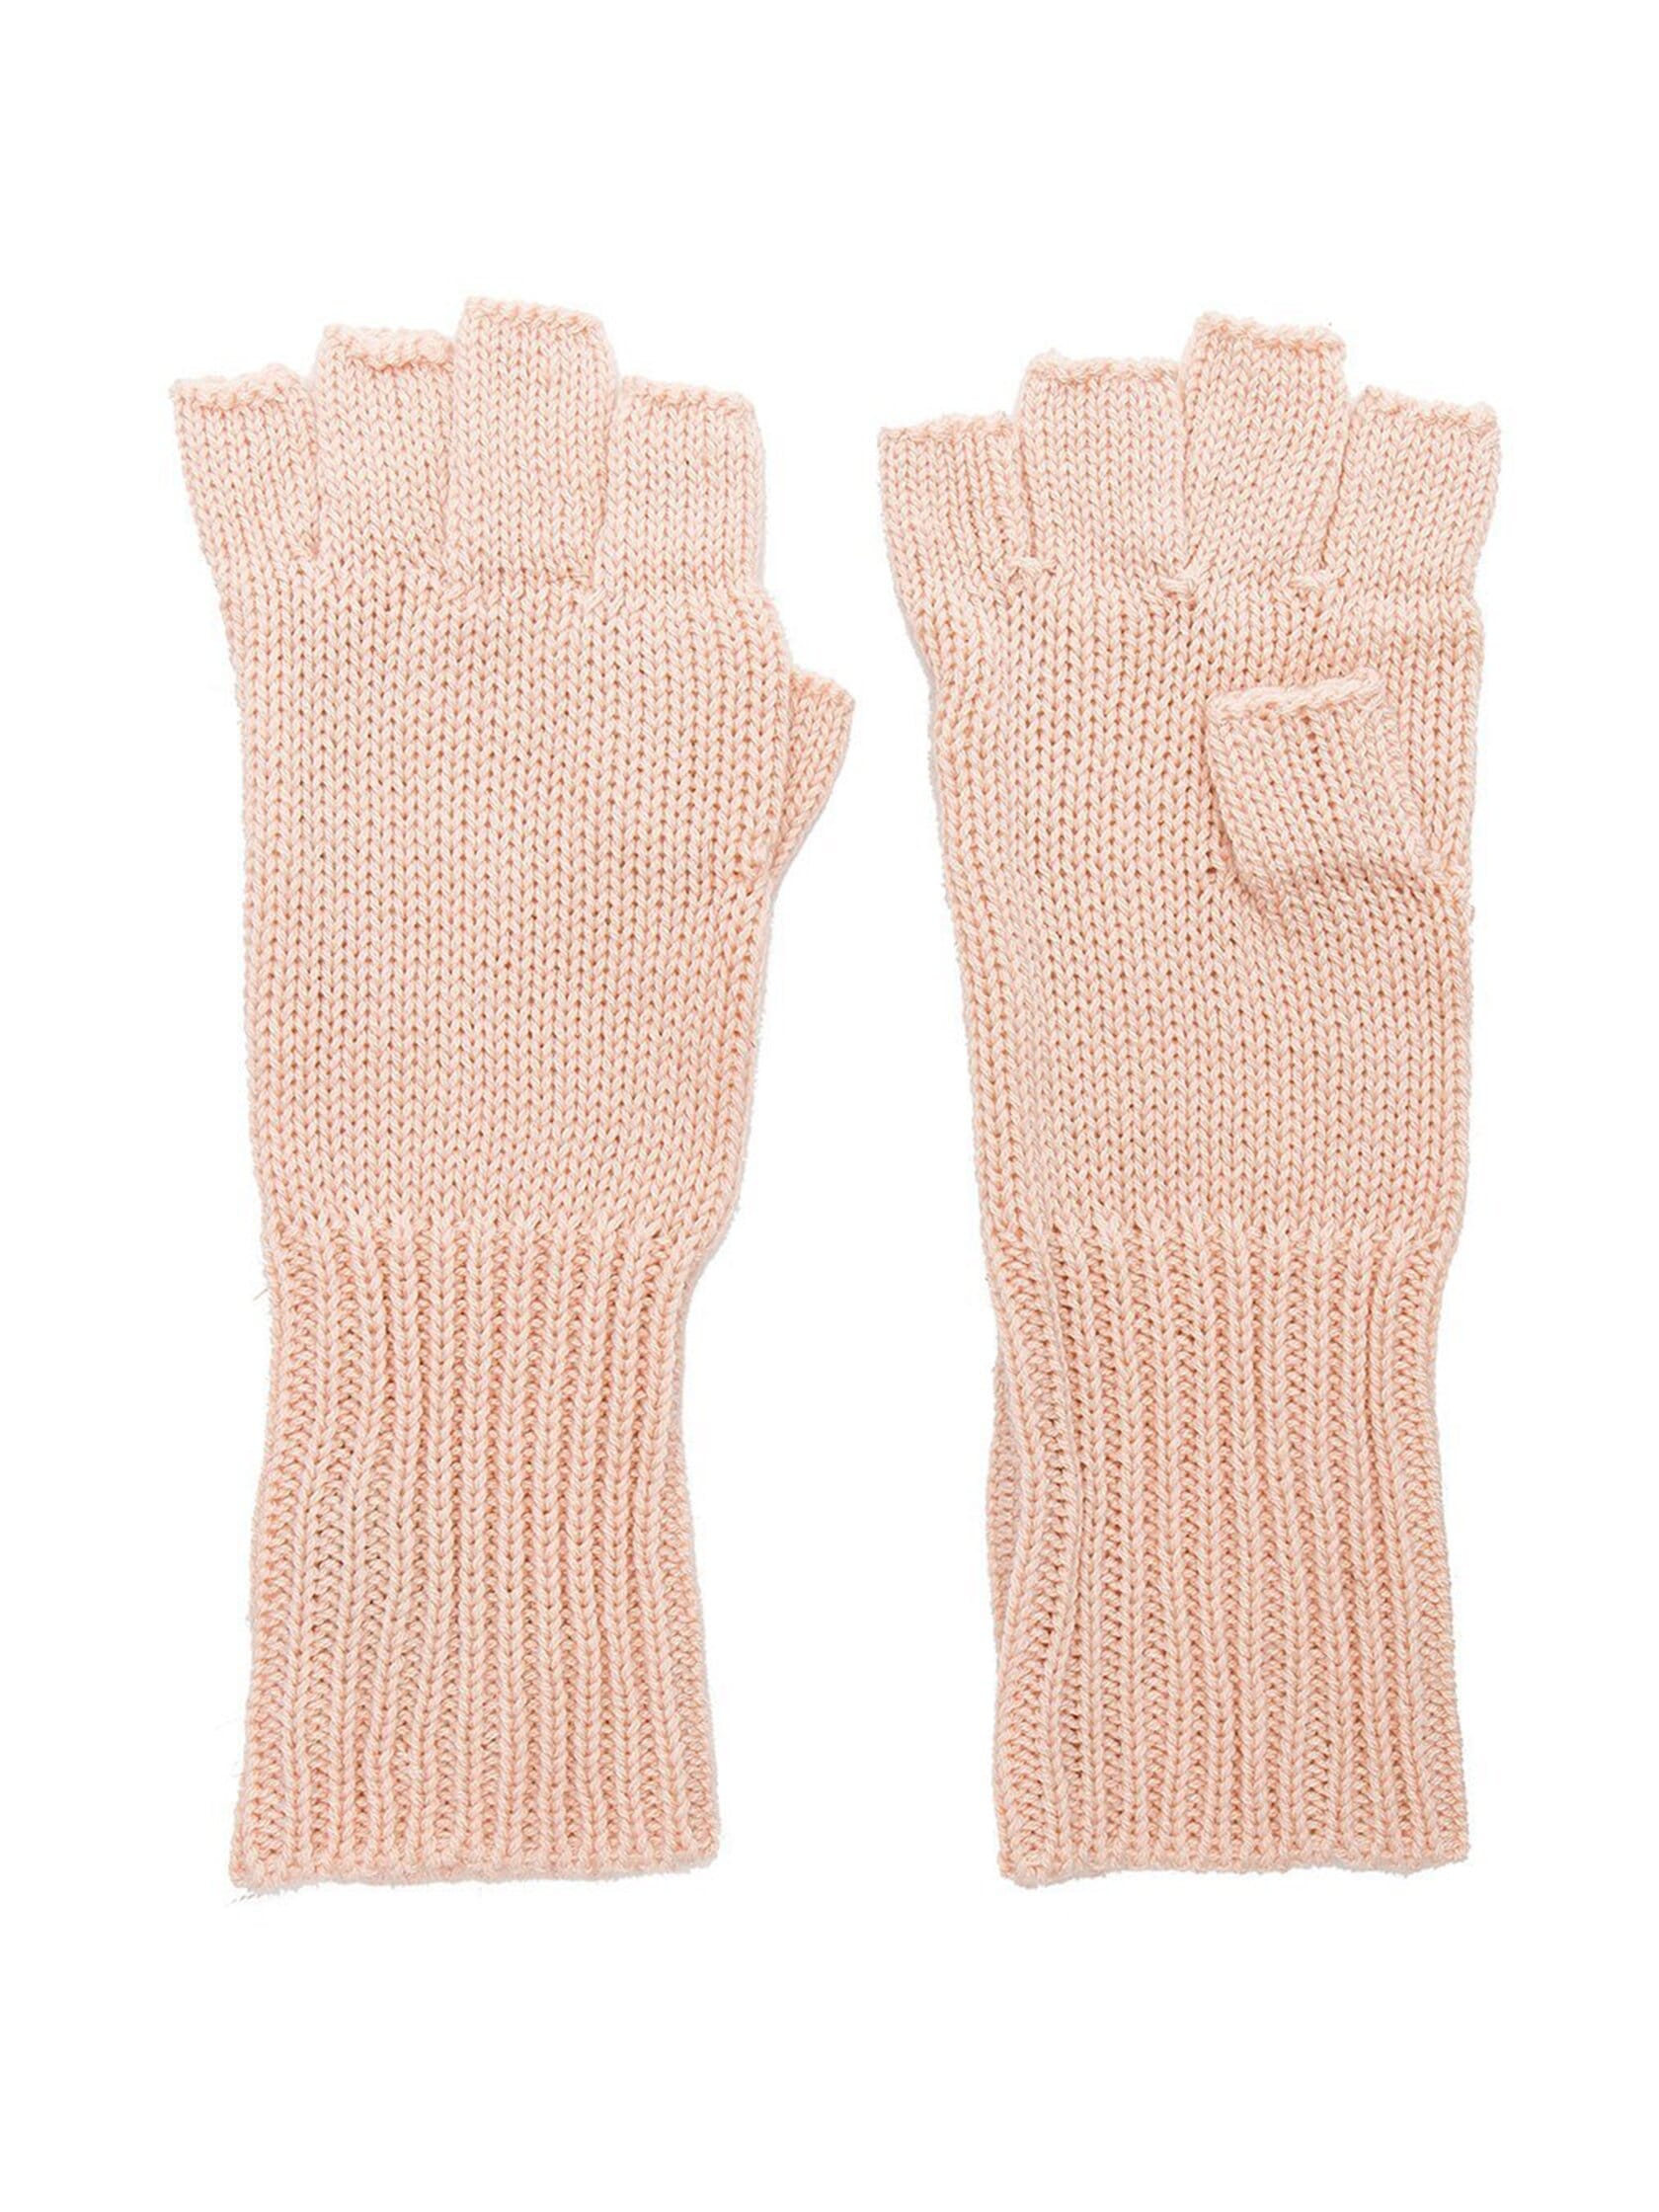 Michael Stars Give Me Some Cashmere Fingerless Gloves in Blush